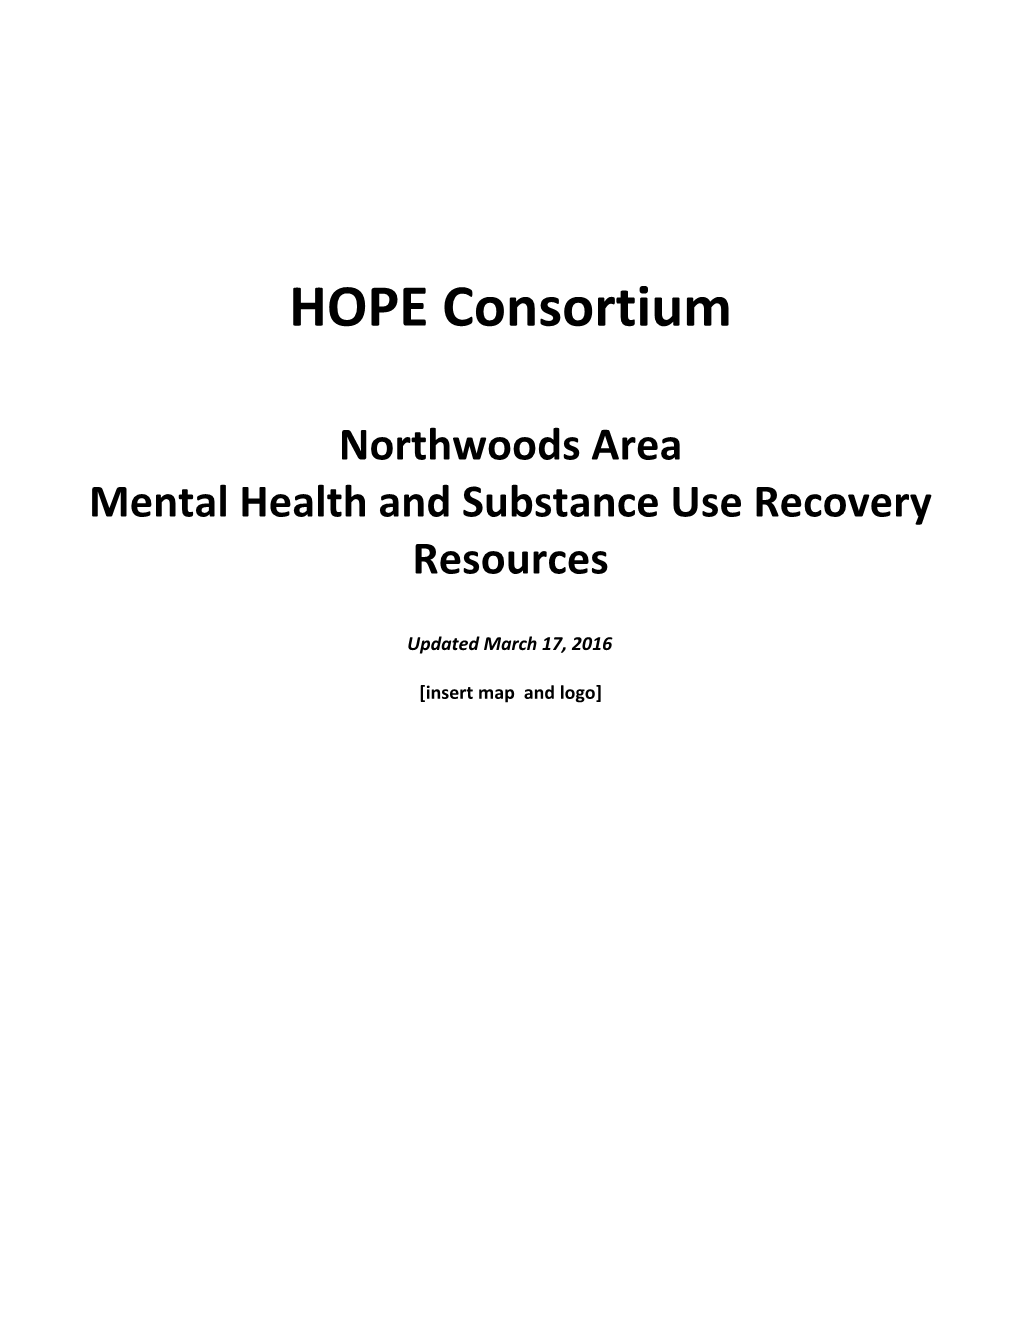 Mental Health and Substance Use Recovery Resources